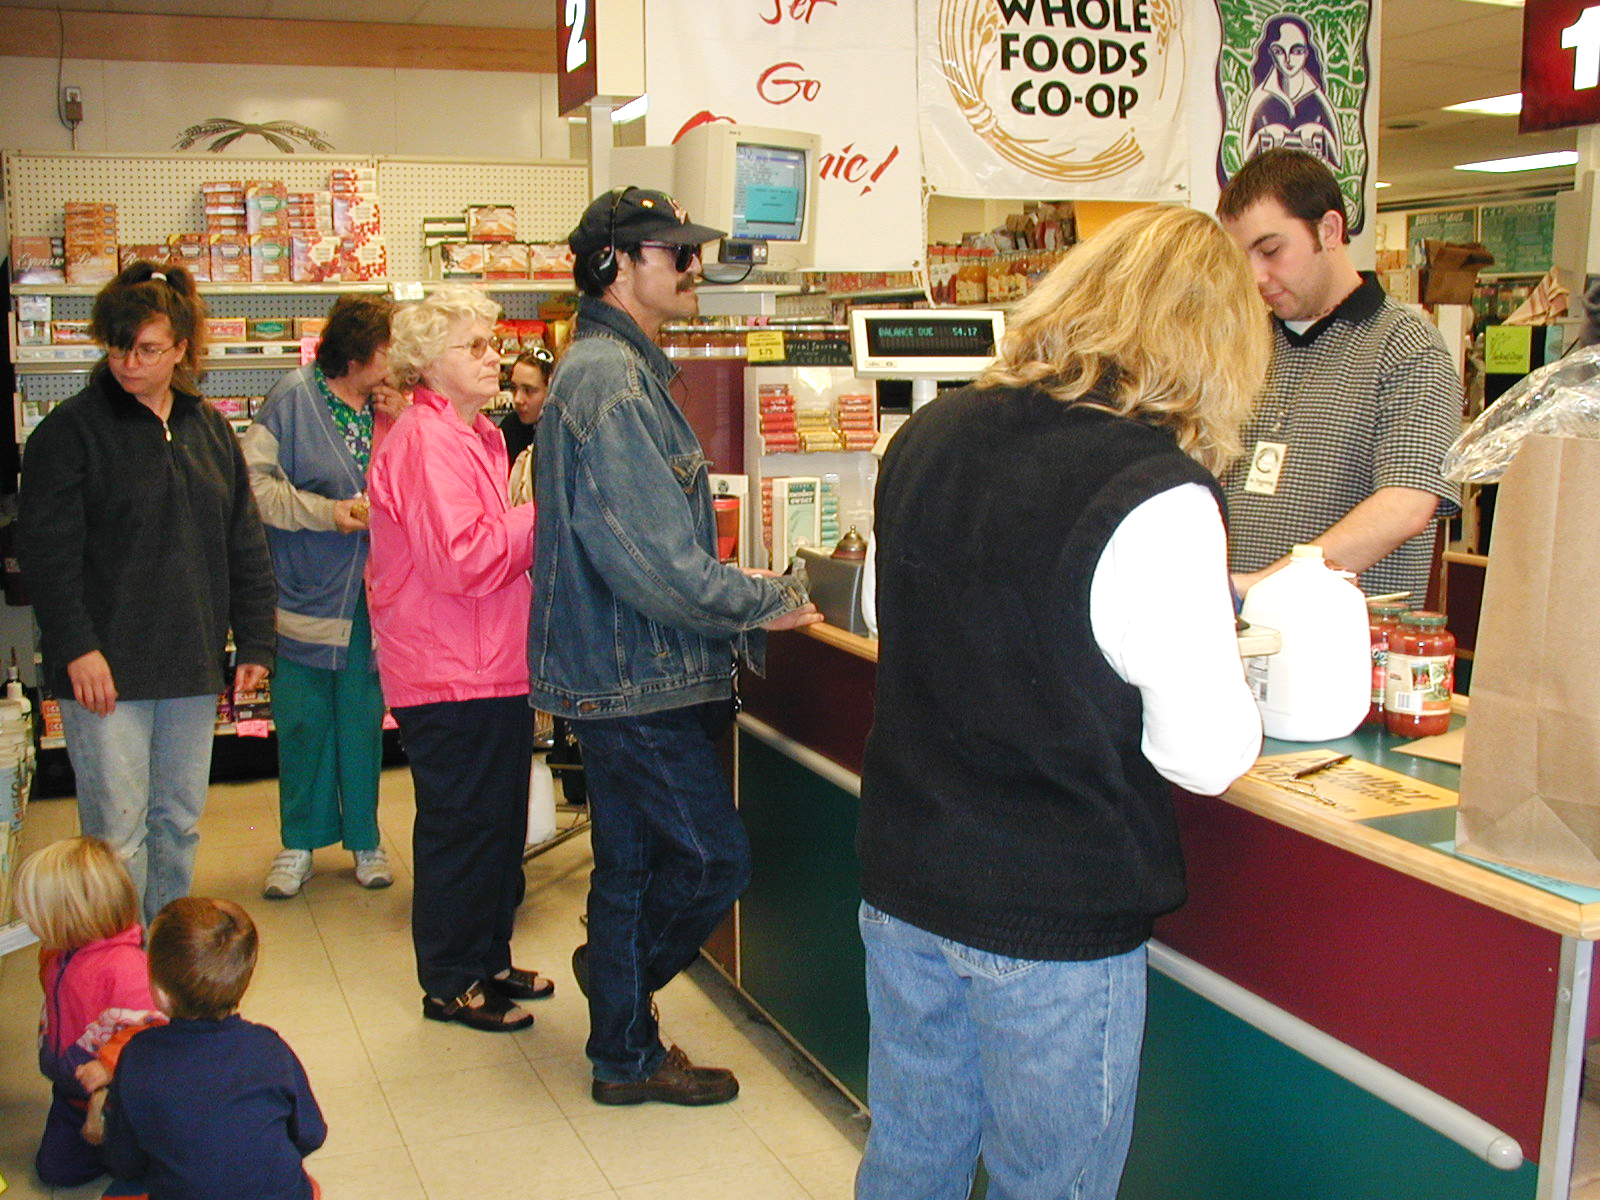 People are standing in line at the checkout counter of Whole Foods Coop Duluth MN. A cashier is scanning items while engaging with a customer in a blue shirt. Shoppers, including children, are waiting or browsing in the background. Various products are visible on the shelves.